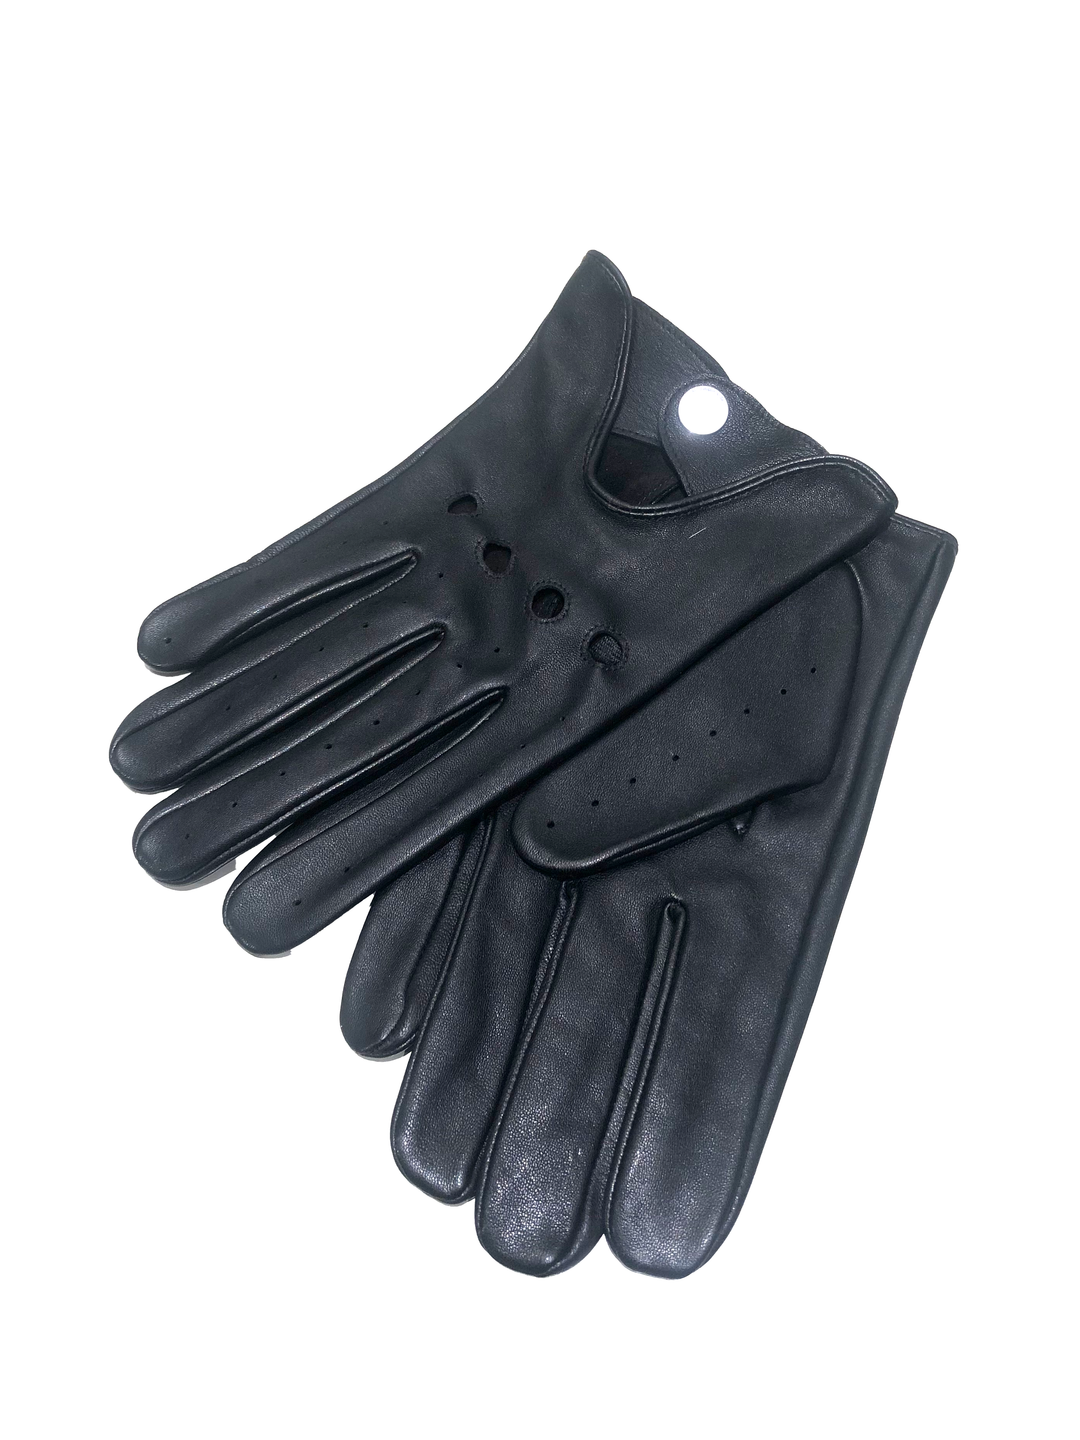 399-M Gloves - Sheep Leather - Drivers Glove - Black